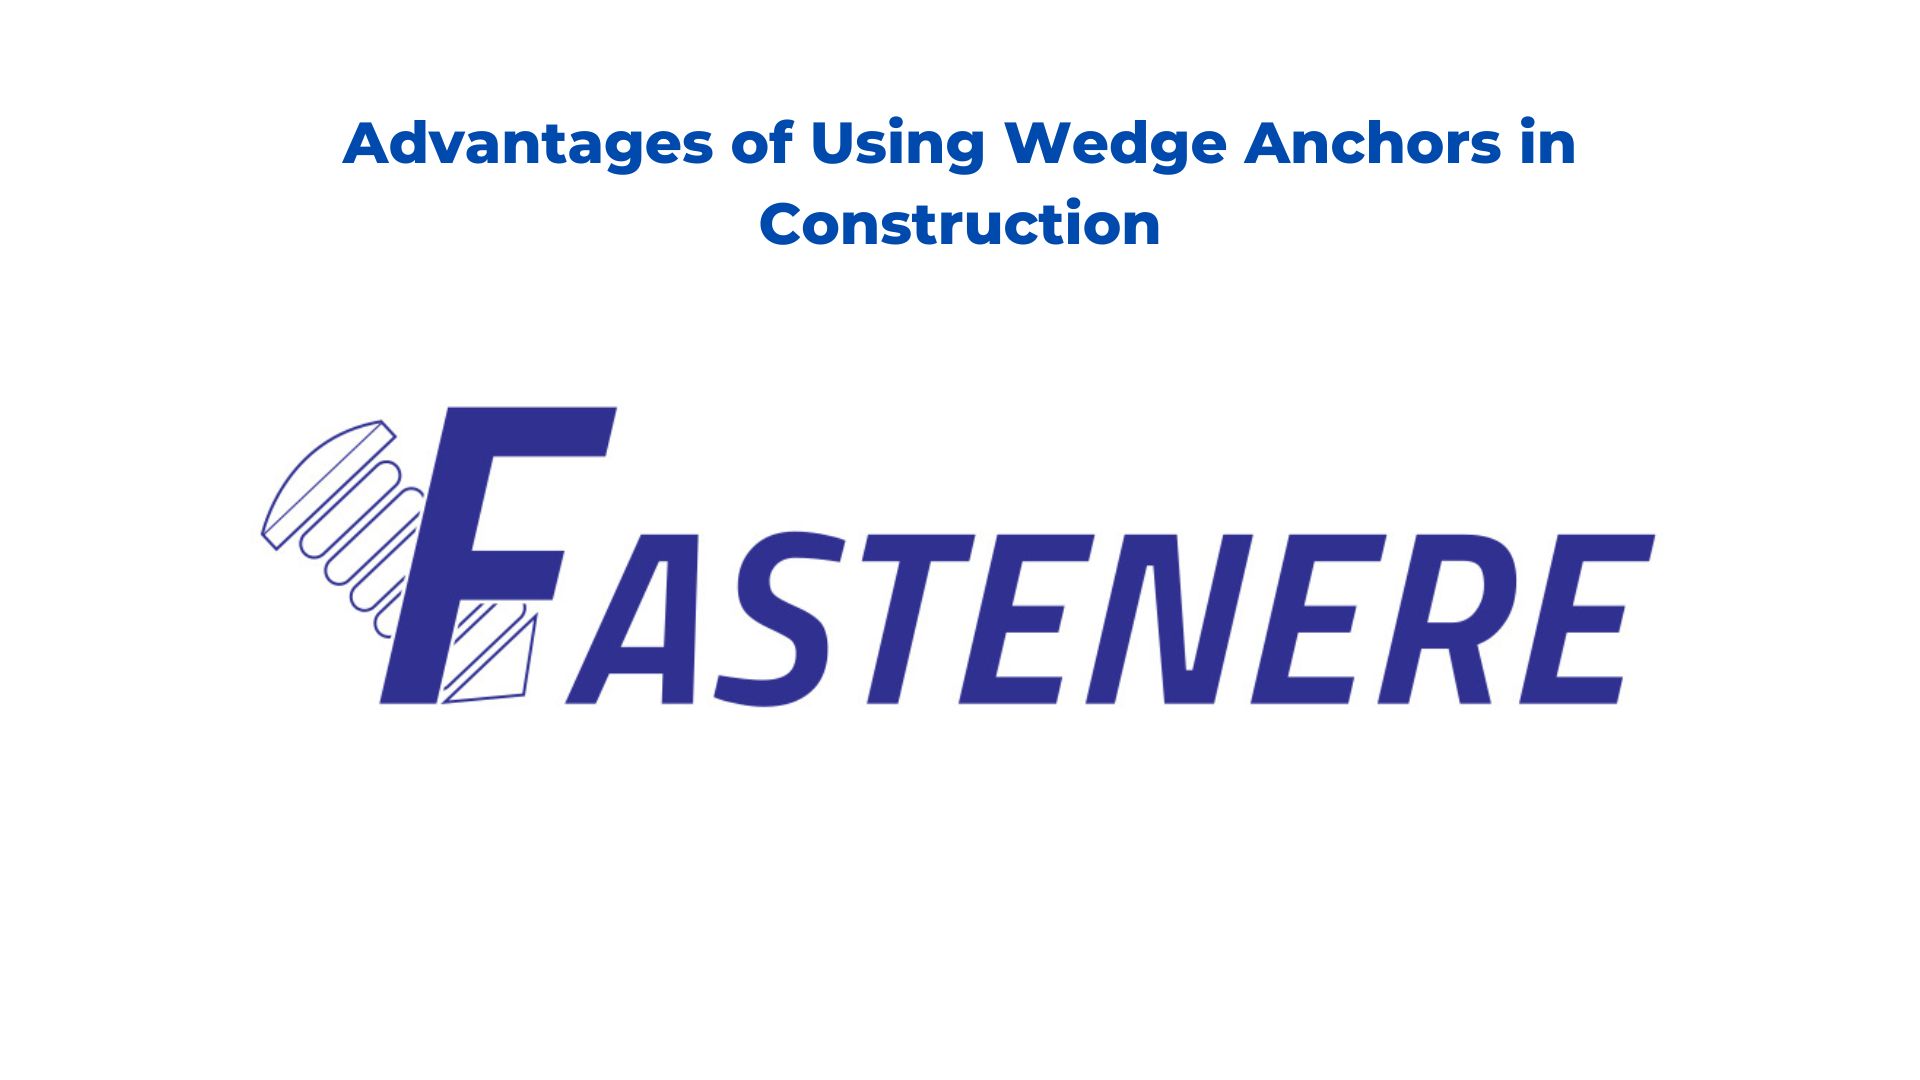 Advantages of Using Wedge Anchors in Construction